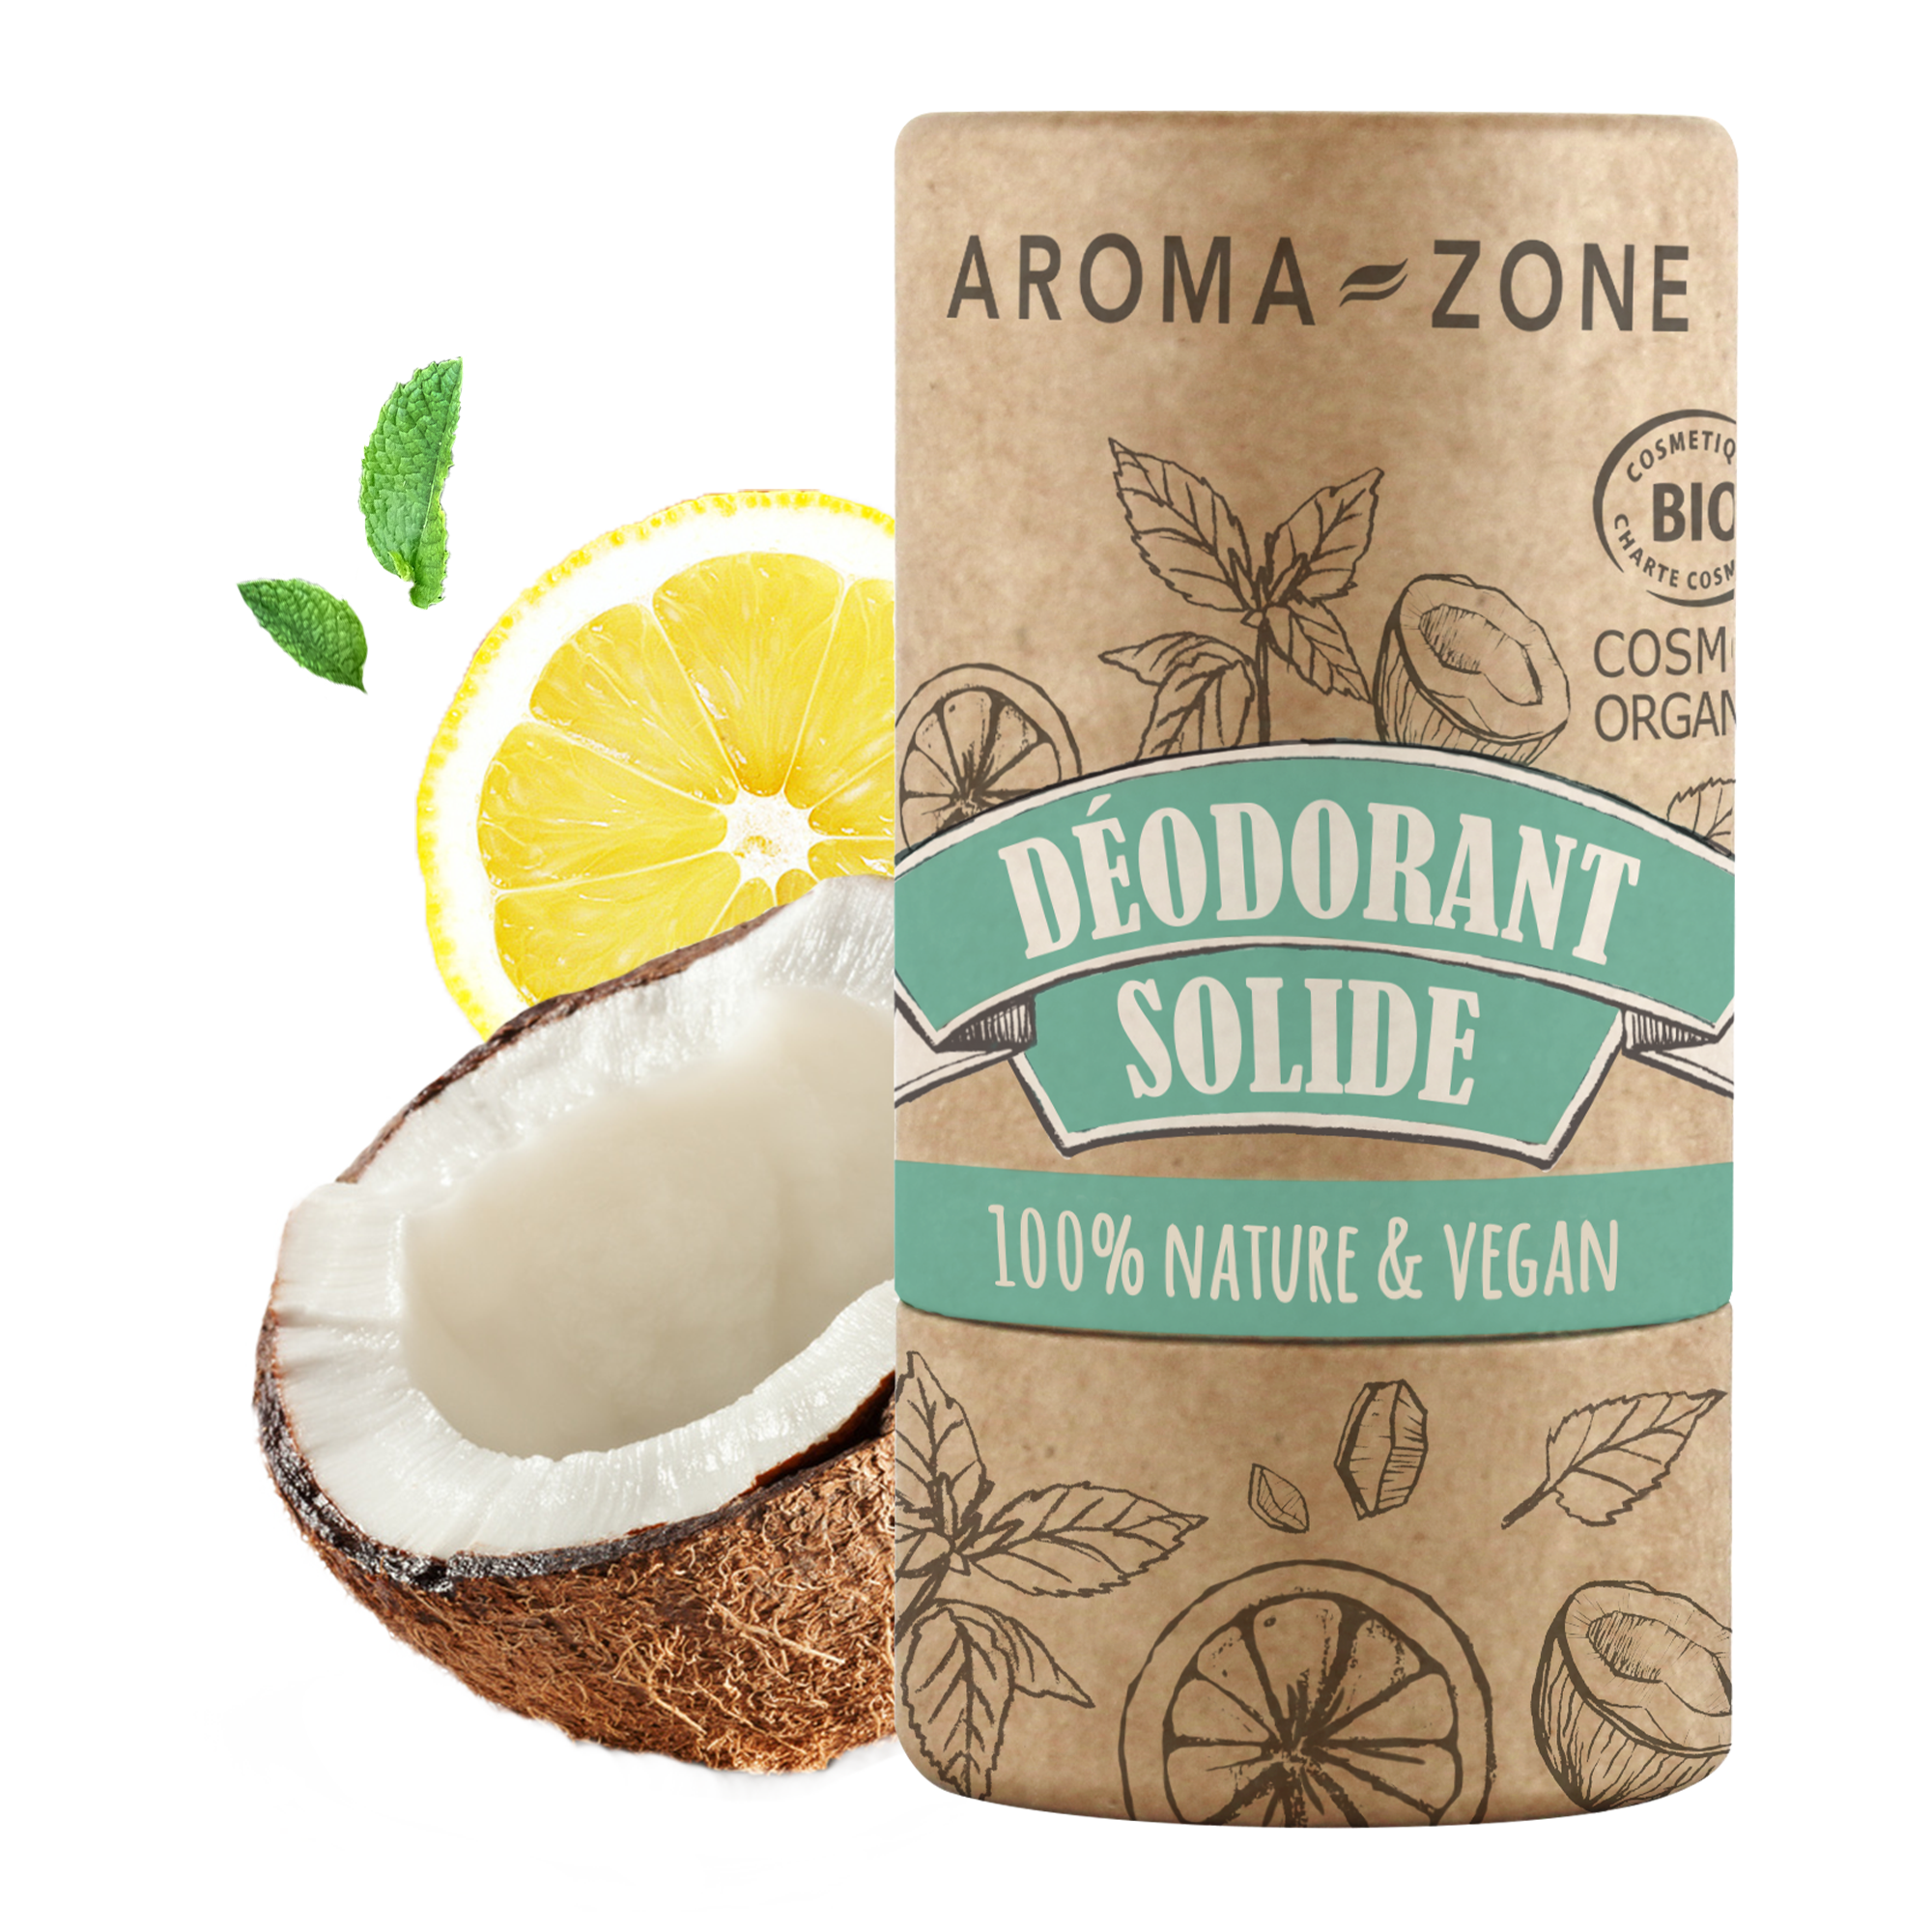 https://cdn.aroma-zone.com/ct/Catalogue_Deodorant--k0oedpXg.png?twic=v1/output=auto/quality=85/cover-max=626x723/resize=-x626/resize-max=2000